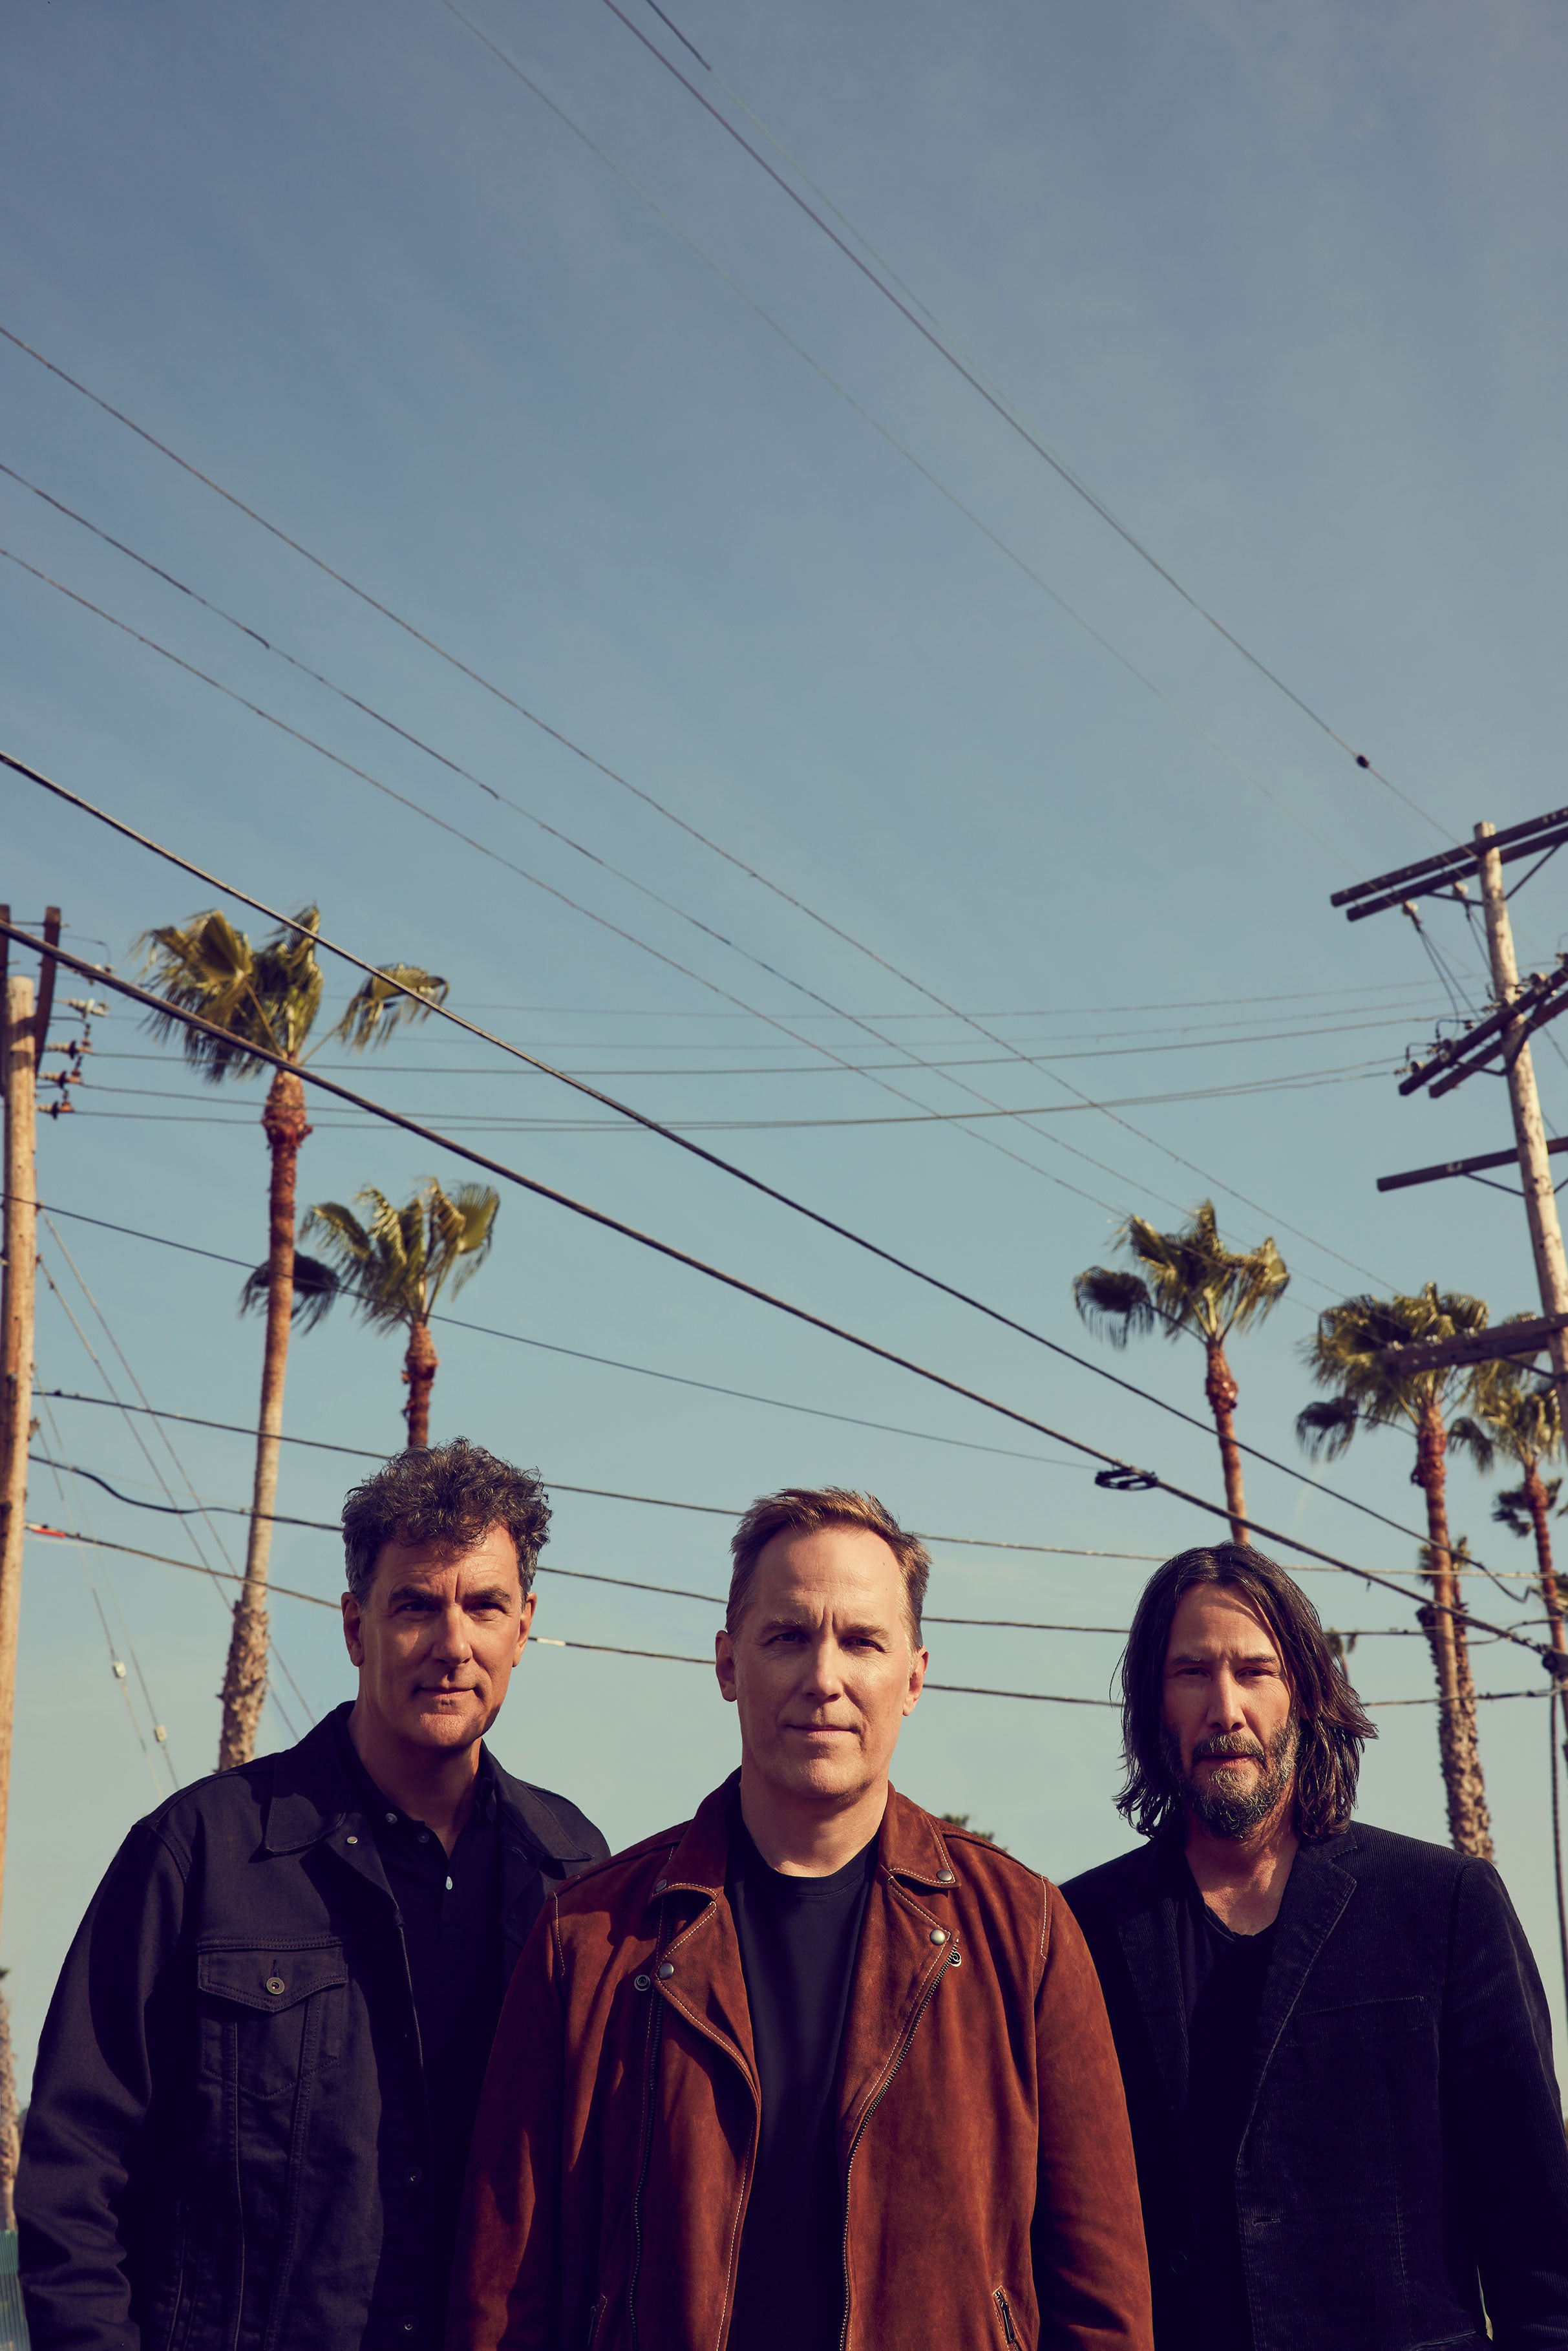 Dogstar - Somewhere Between The Power Lines and Palm Trees Tour pre-sale code for show tickets in Nashville, TN (Brooklyn Bowl Nashville)